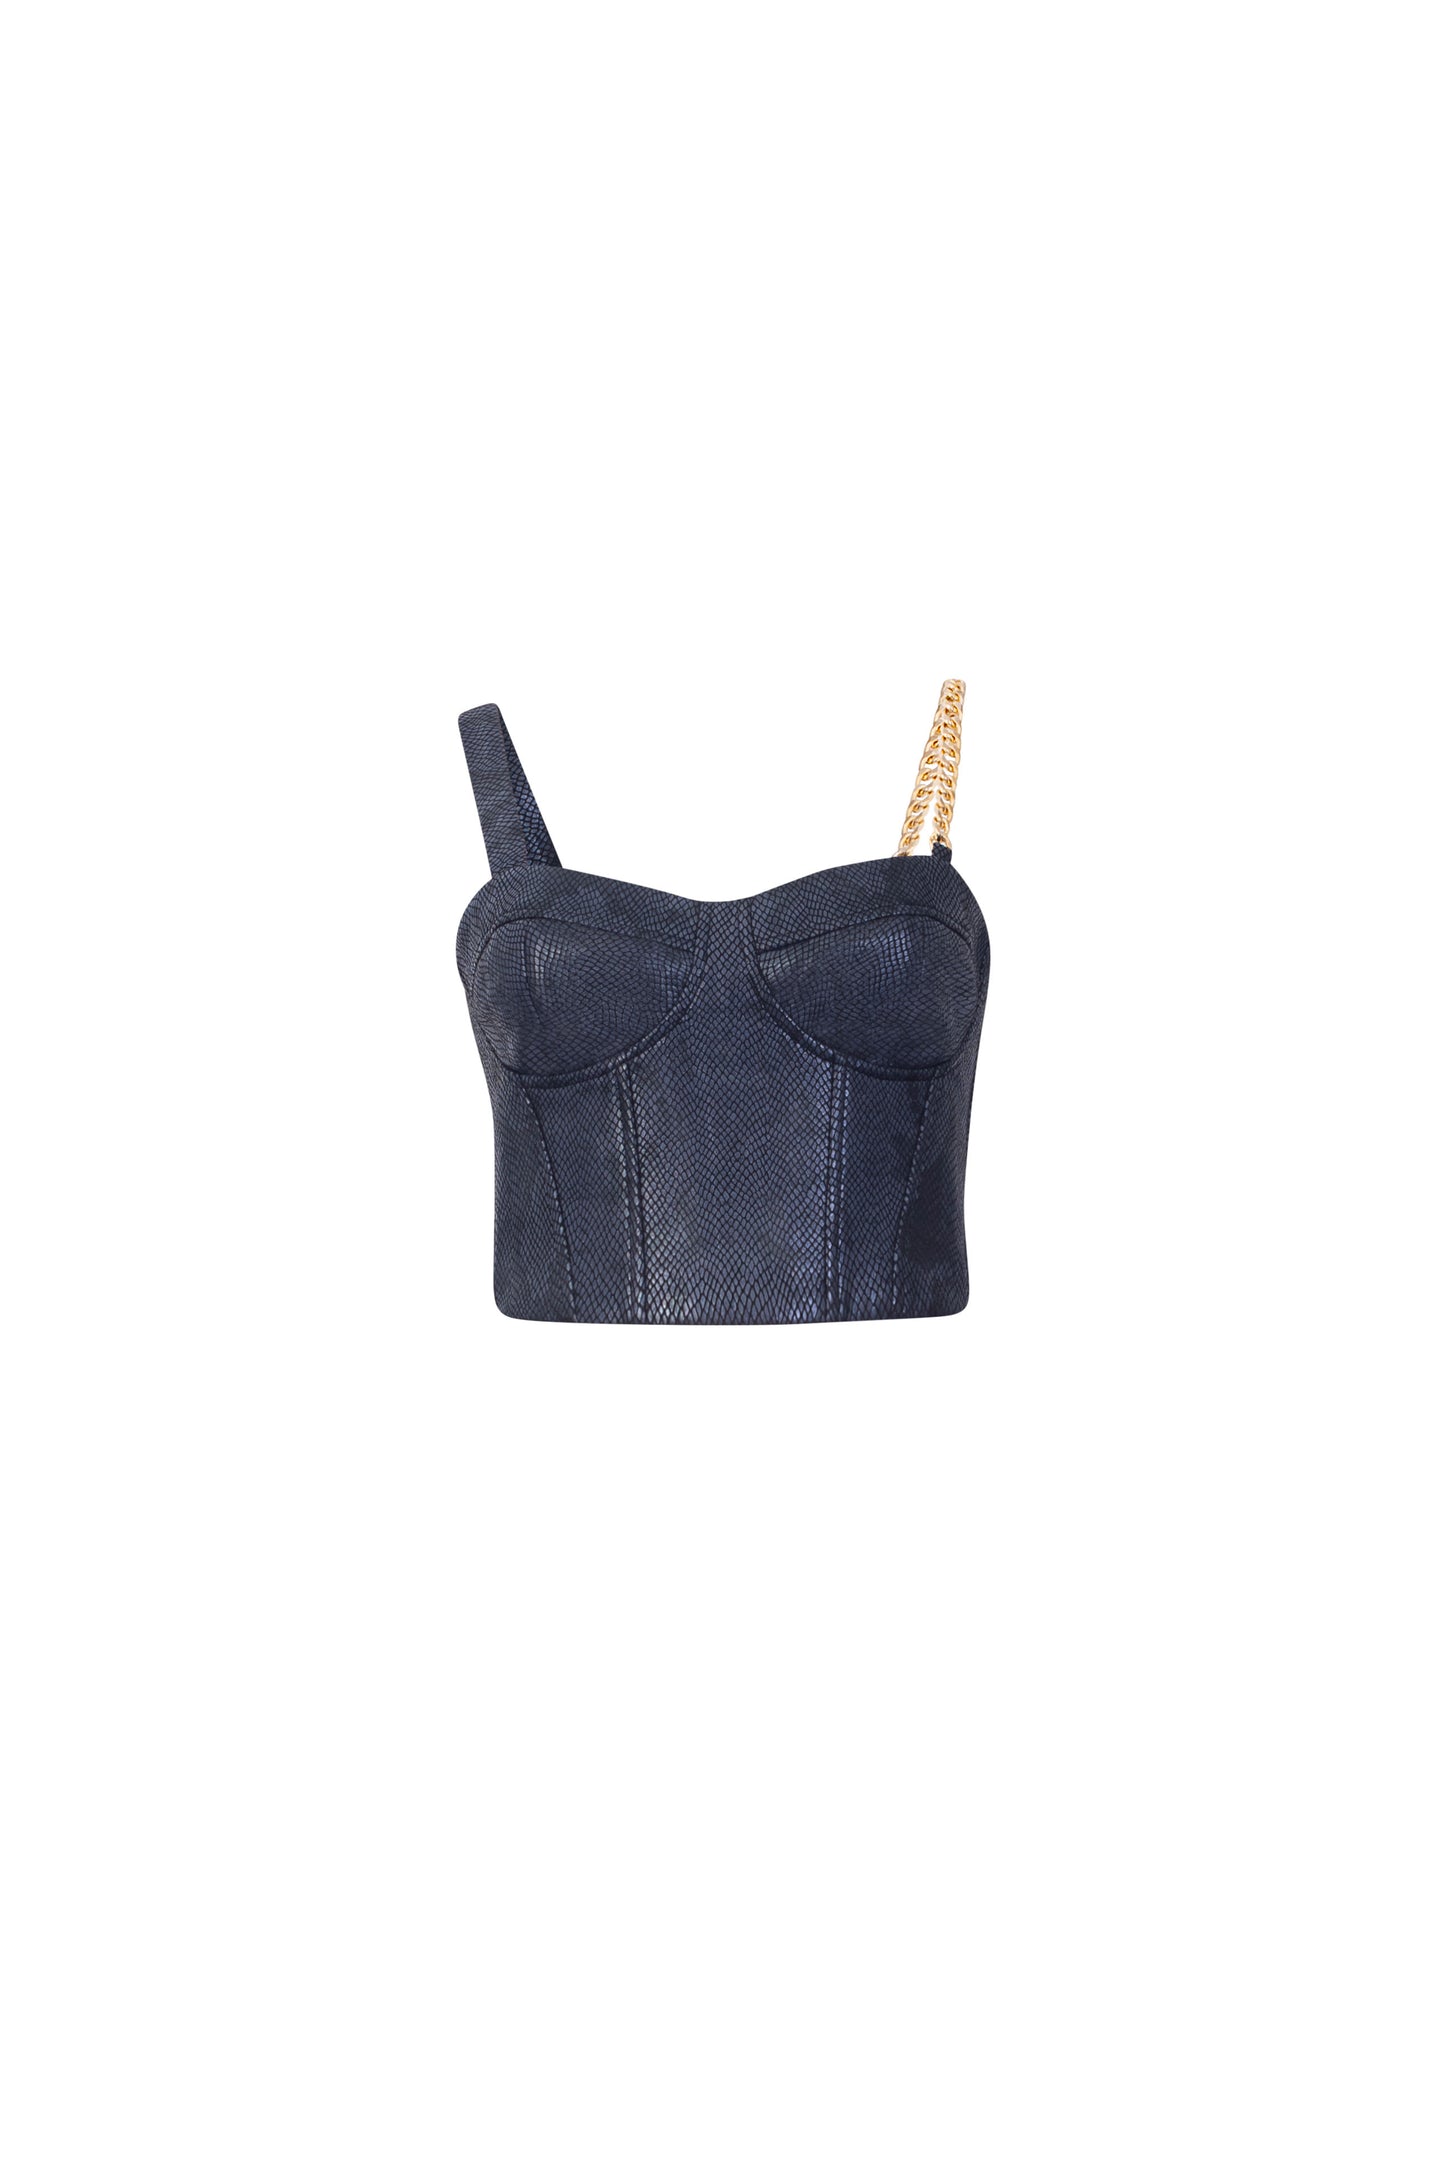 Asymmetrical Leather Bustier with Chain Strap - Navy